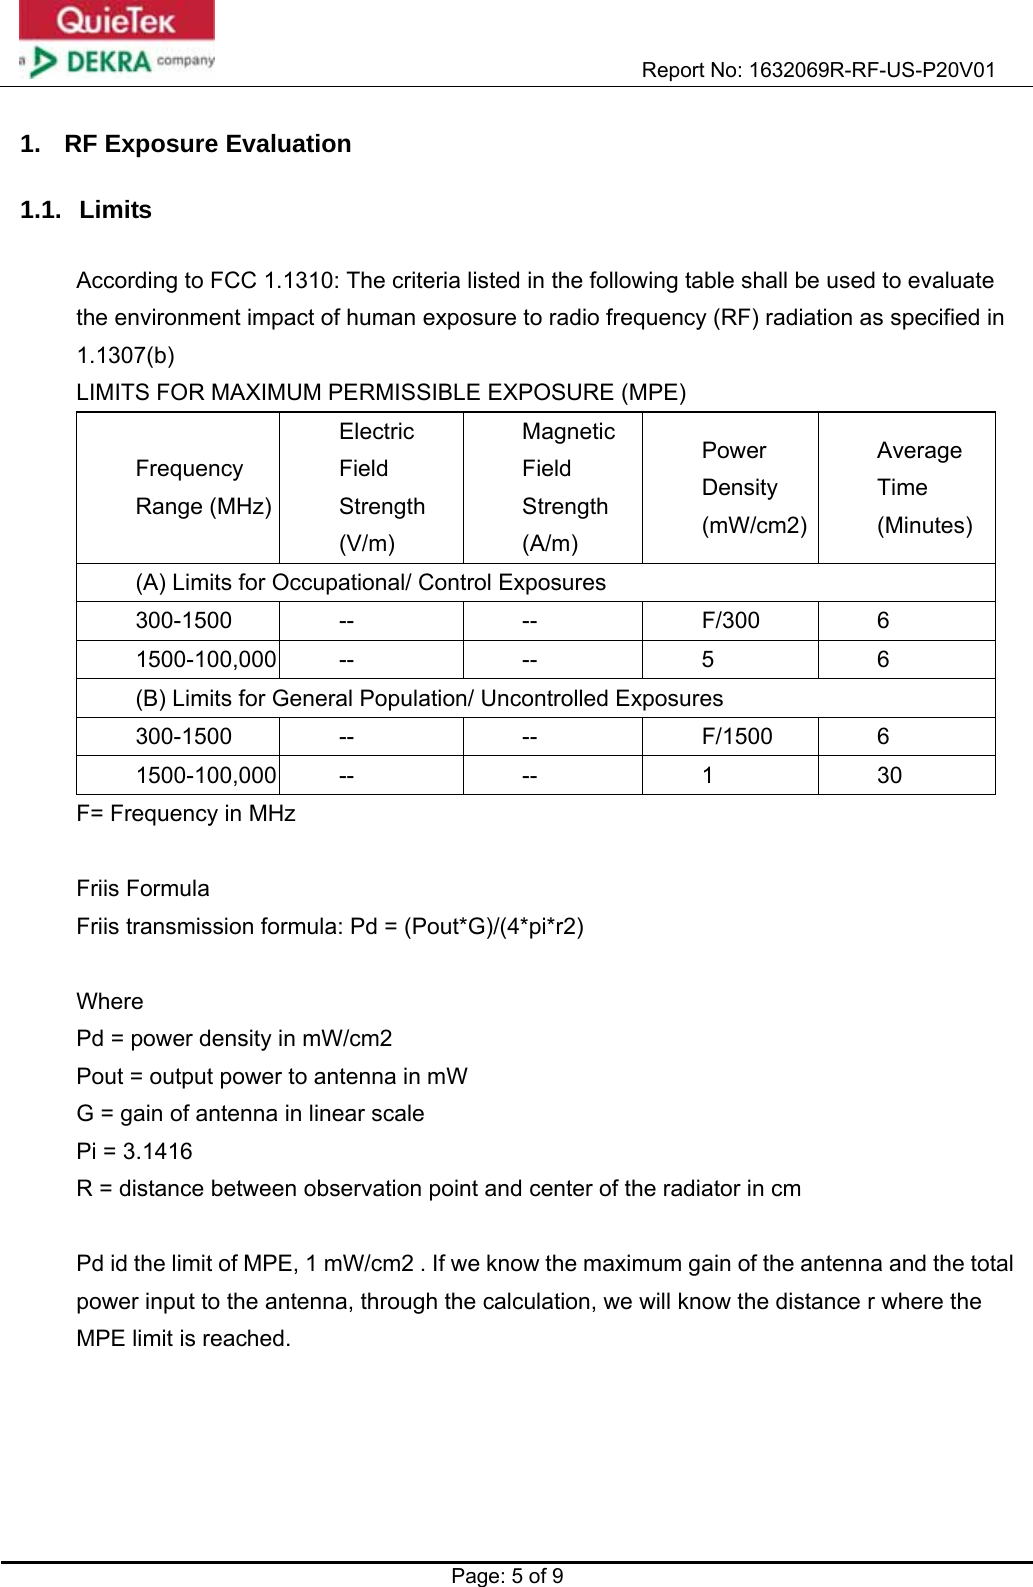                                                           Report No: 1632069R-RF-US-P20V01    Page: 5 of 9  1.  RF Exposure Evaluation  1.1. Limits  According to FCC 1.1310: The criteria listed in the following table shall be used to evaluate the environment impact of human exposure to radio frequency (RF) radiation as specified in 1.1307(b) LIMITS FOR MAXIMUM PERMISSIBLE EXPOSURE (MPE) Frequency Range (MHz)Electric Field Strength (V/m) Magnetic Field Strength (A/m) Power Density (mW/cm2) Average Time (Minutes) (A) Limits for Occupational/ Control Exposures 300-1500 --  --  F/300  6 1500-100,000 --  --  5  6 (B) Limits for General Population/ Uncontrolled Exposures 300-1500 --  --  F/1500 6 1500-100,000 --  --  1  30 F= Frequency in MHz  Friis Formula Friis transmission formula: Pd = (Pout*G)/(4*pi*r2)  Where  Pd = power density in mW/cm2 Pout = output power to antenna in mW G = gain of antenna in linear scale Pi = 3.1416 R = distance between observation point and center of the radiator in cm  Pd id the limit of MPE, 1 mW/cm2 . If we know the maximum gain of the antenna and the total power input to the antenna, through the calculation, we will know the distance r where the MPE limit is reached.  